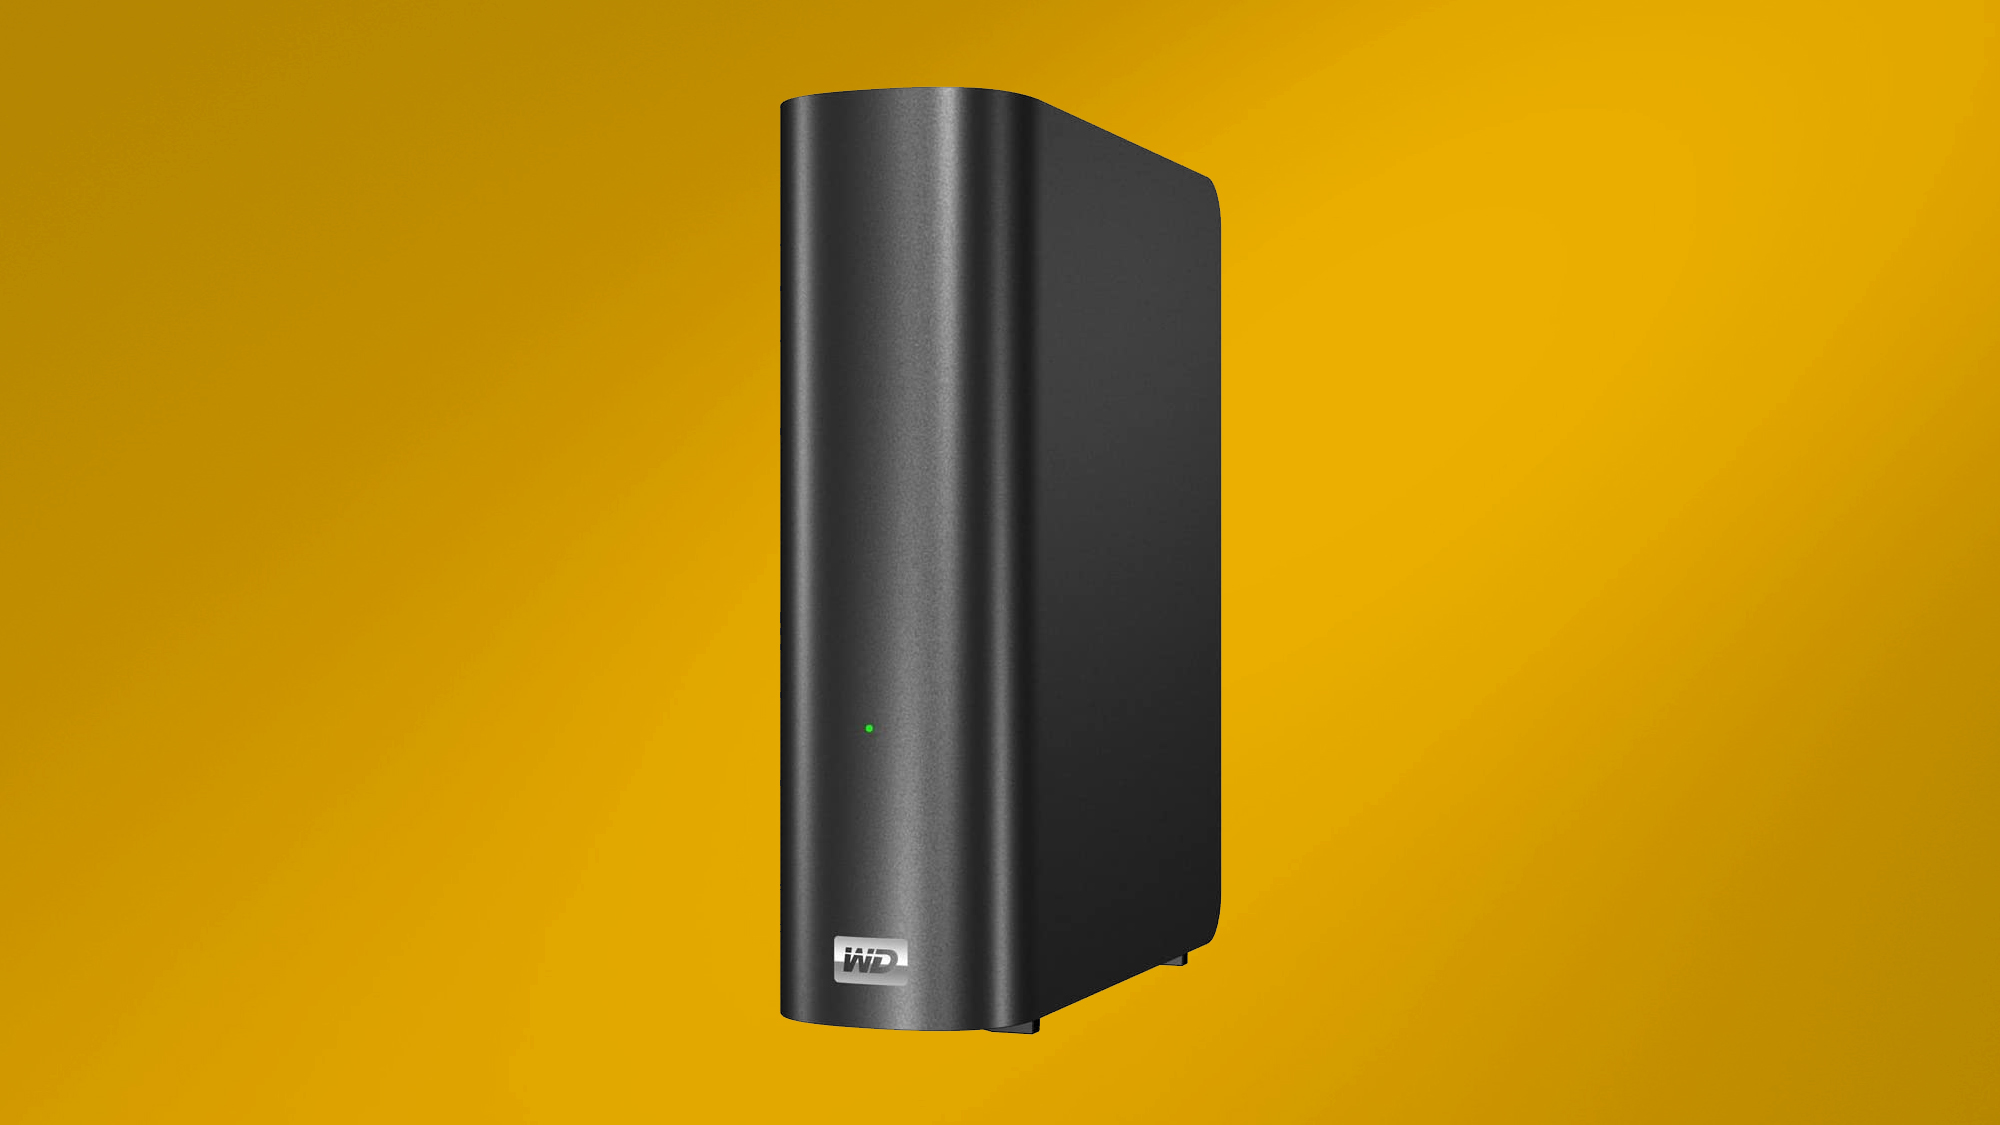 can get my wd my book external hard drive to turn on